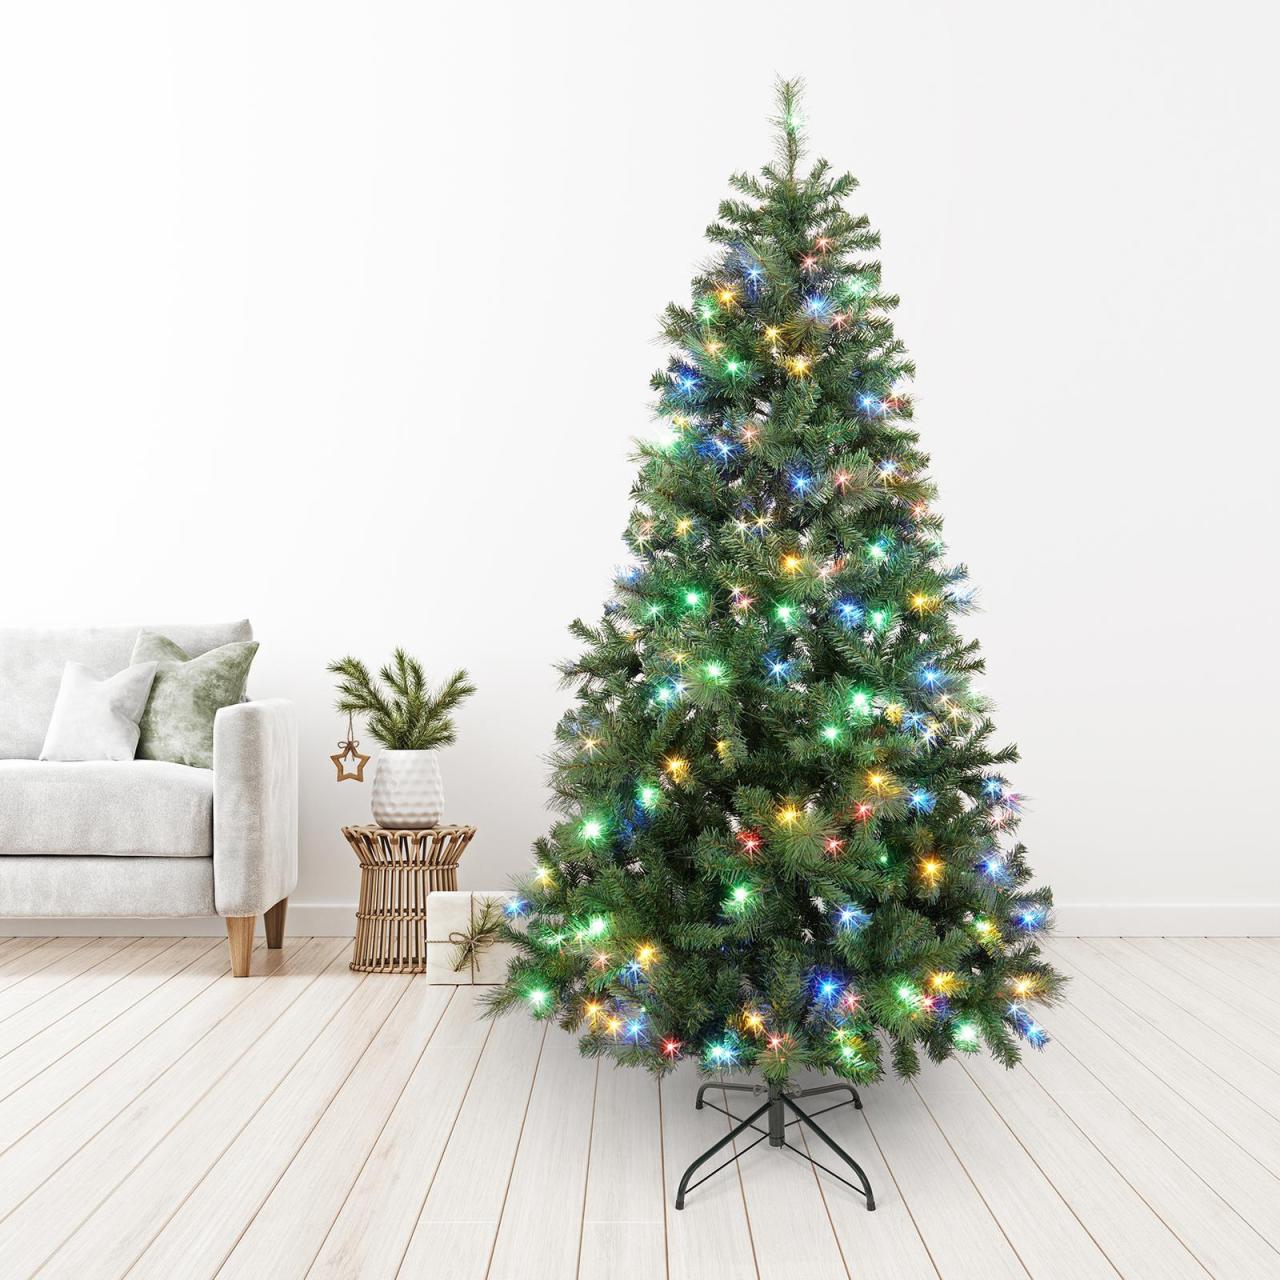 Hanging Plants Indoor | Bunnings Christmas Trees in Pots: A Guide to Selecting, Caring, and Storing Your Festive Foliage